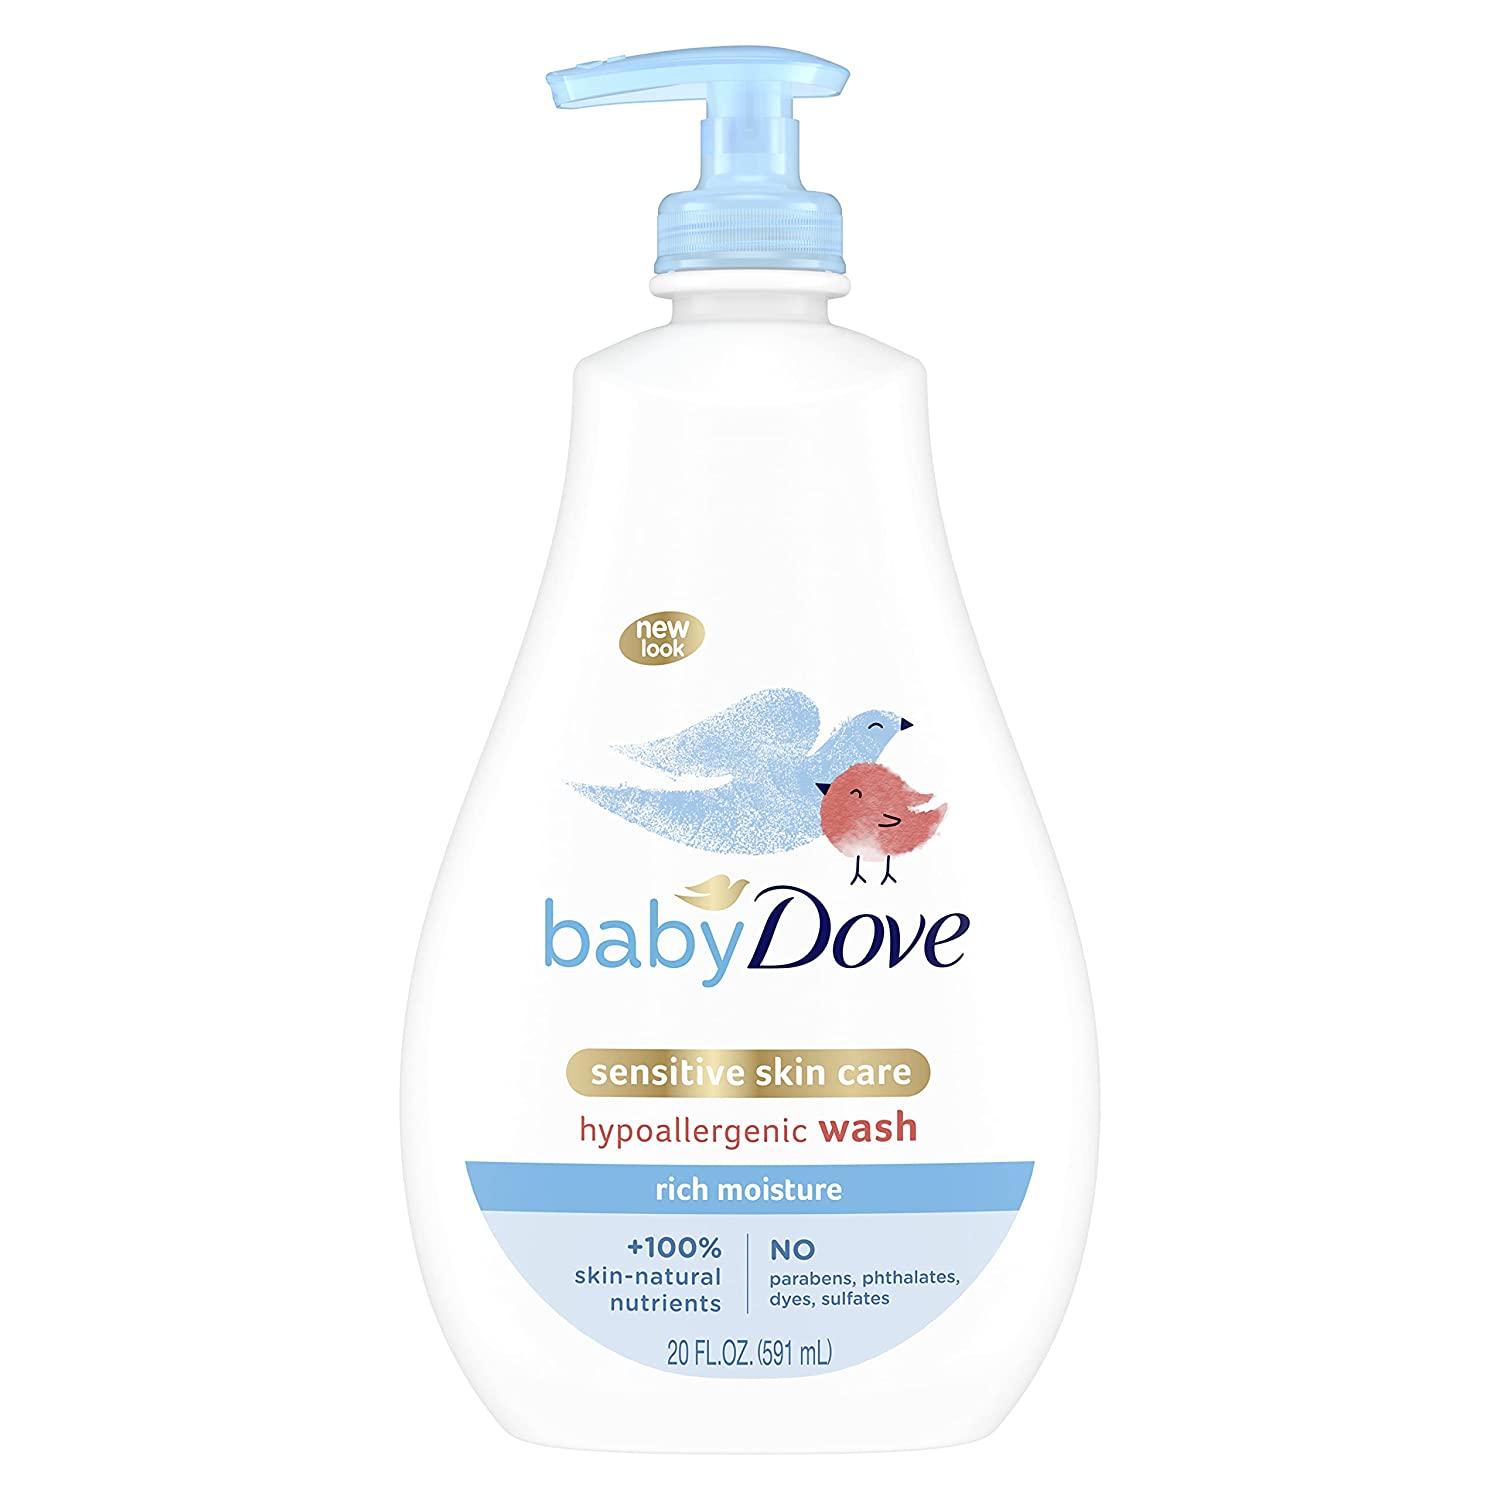 Baby Dove Sensitive Skin Care Baby Wash for $5.99 Shipped